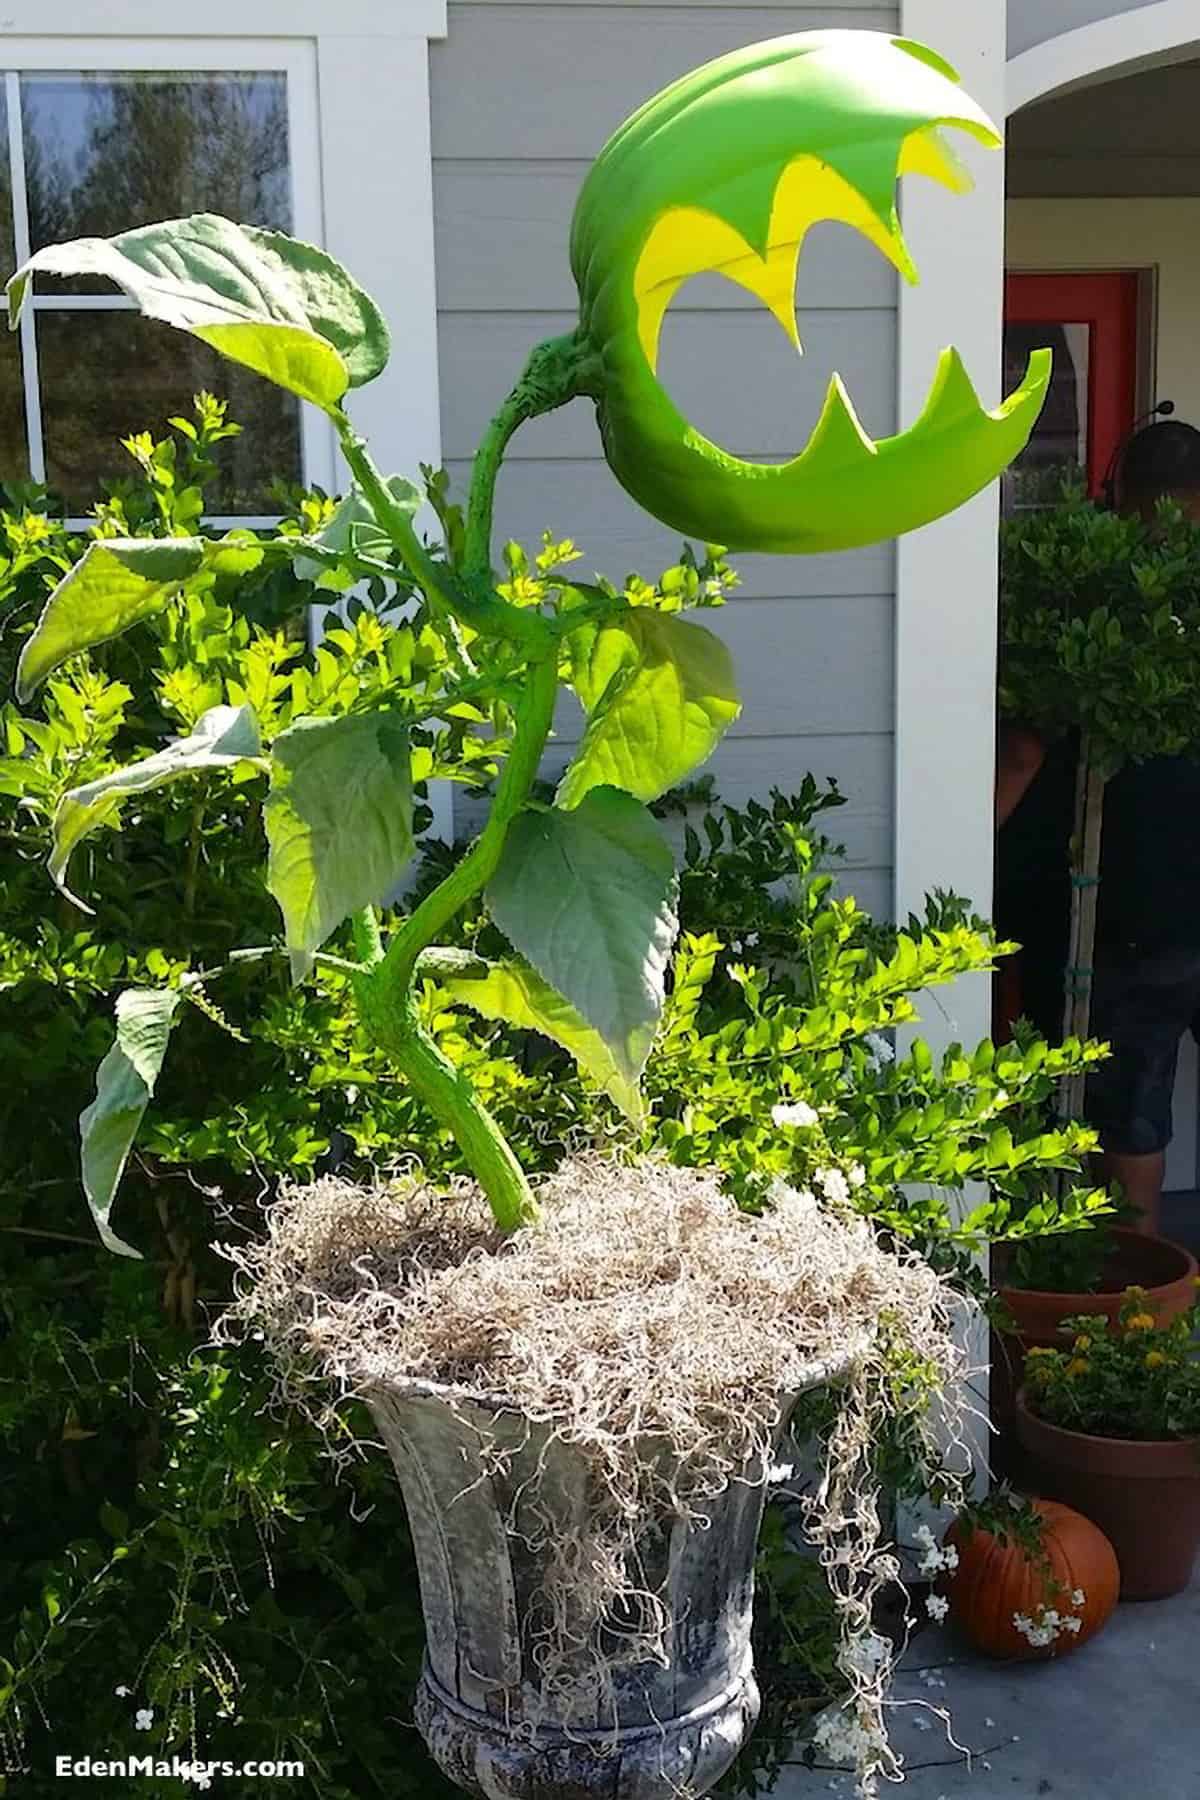 DIY man eating plant similar to little shop of horrors.